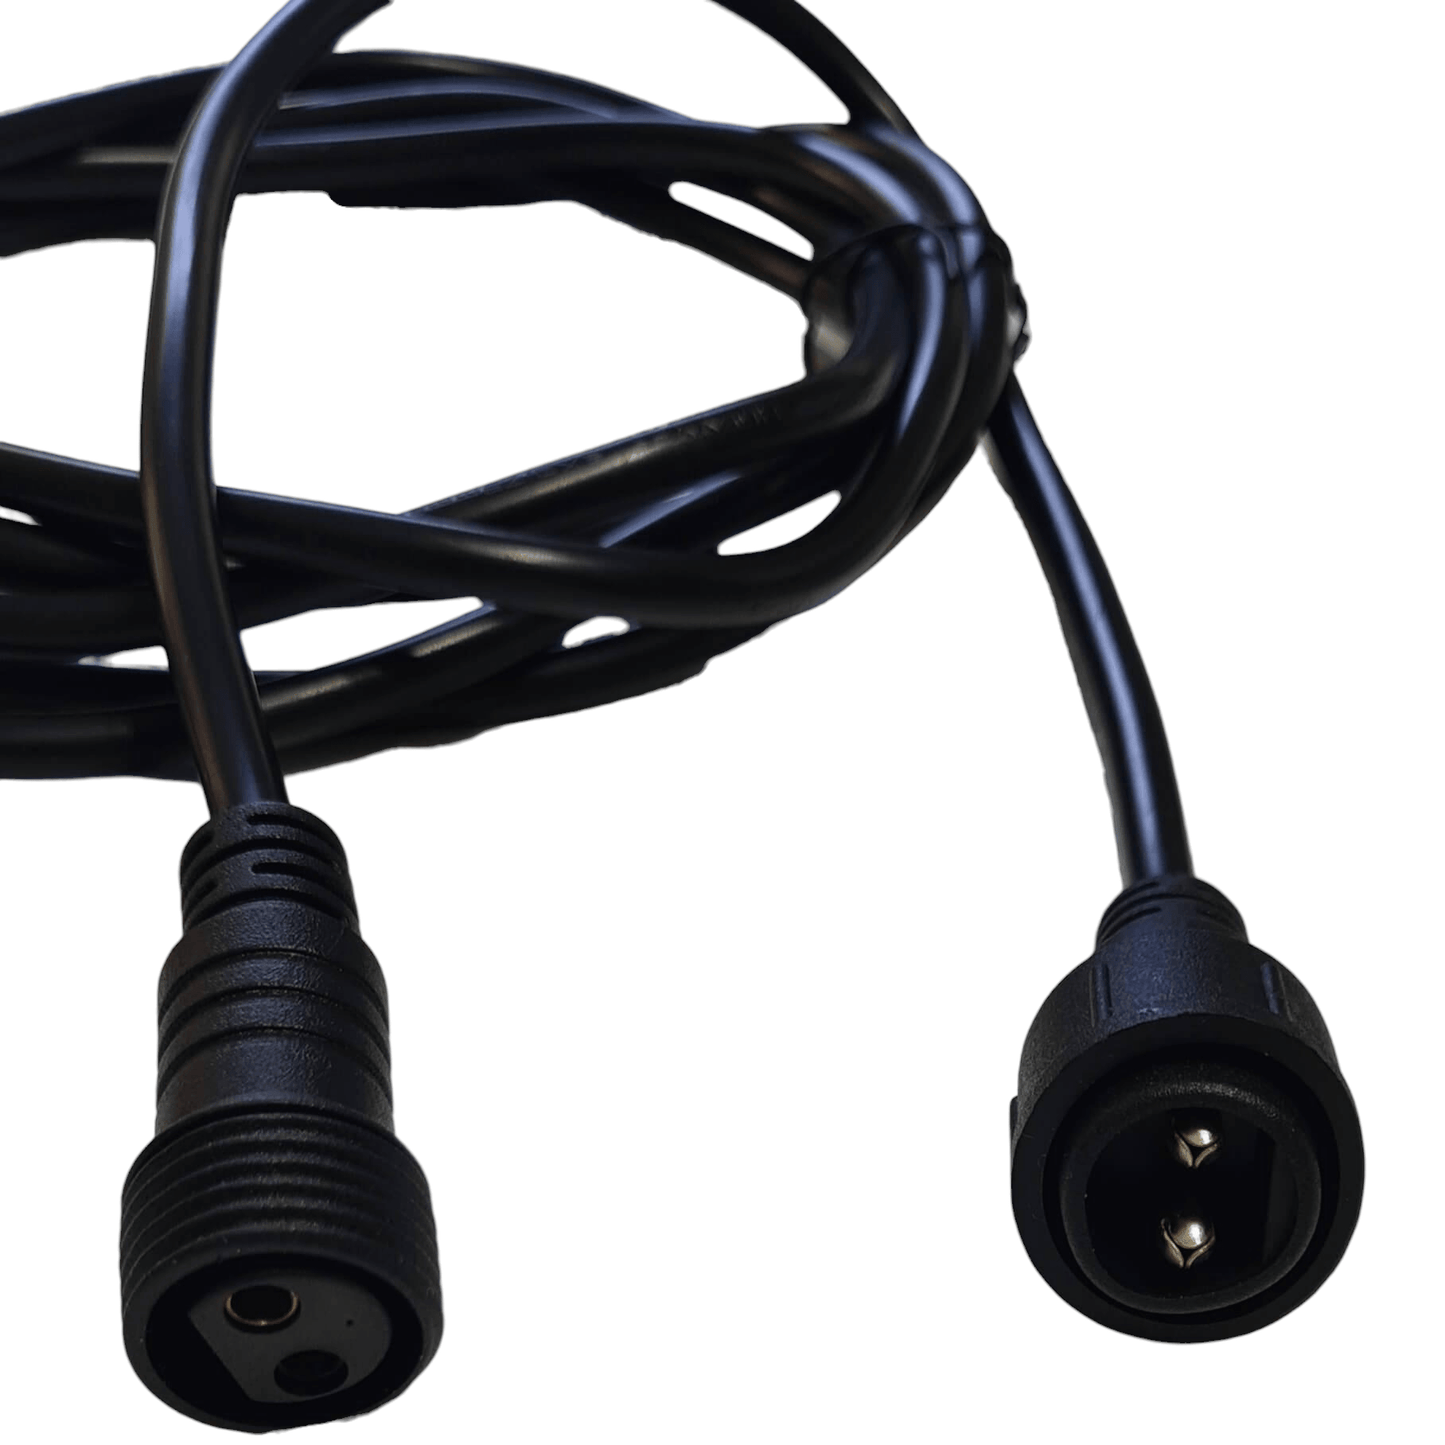 6 Metre Extension Cable Kit For Heavy Duty Waterproof Outdoor String Lights - 6M - Lighting Legends